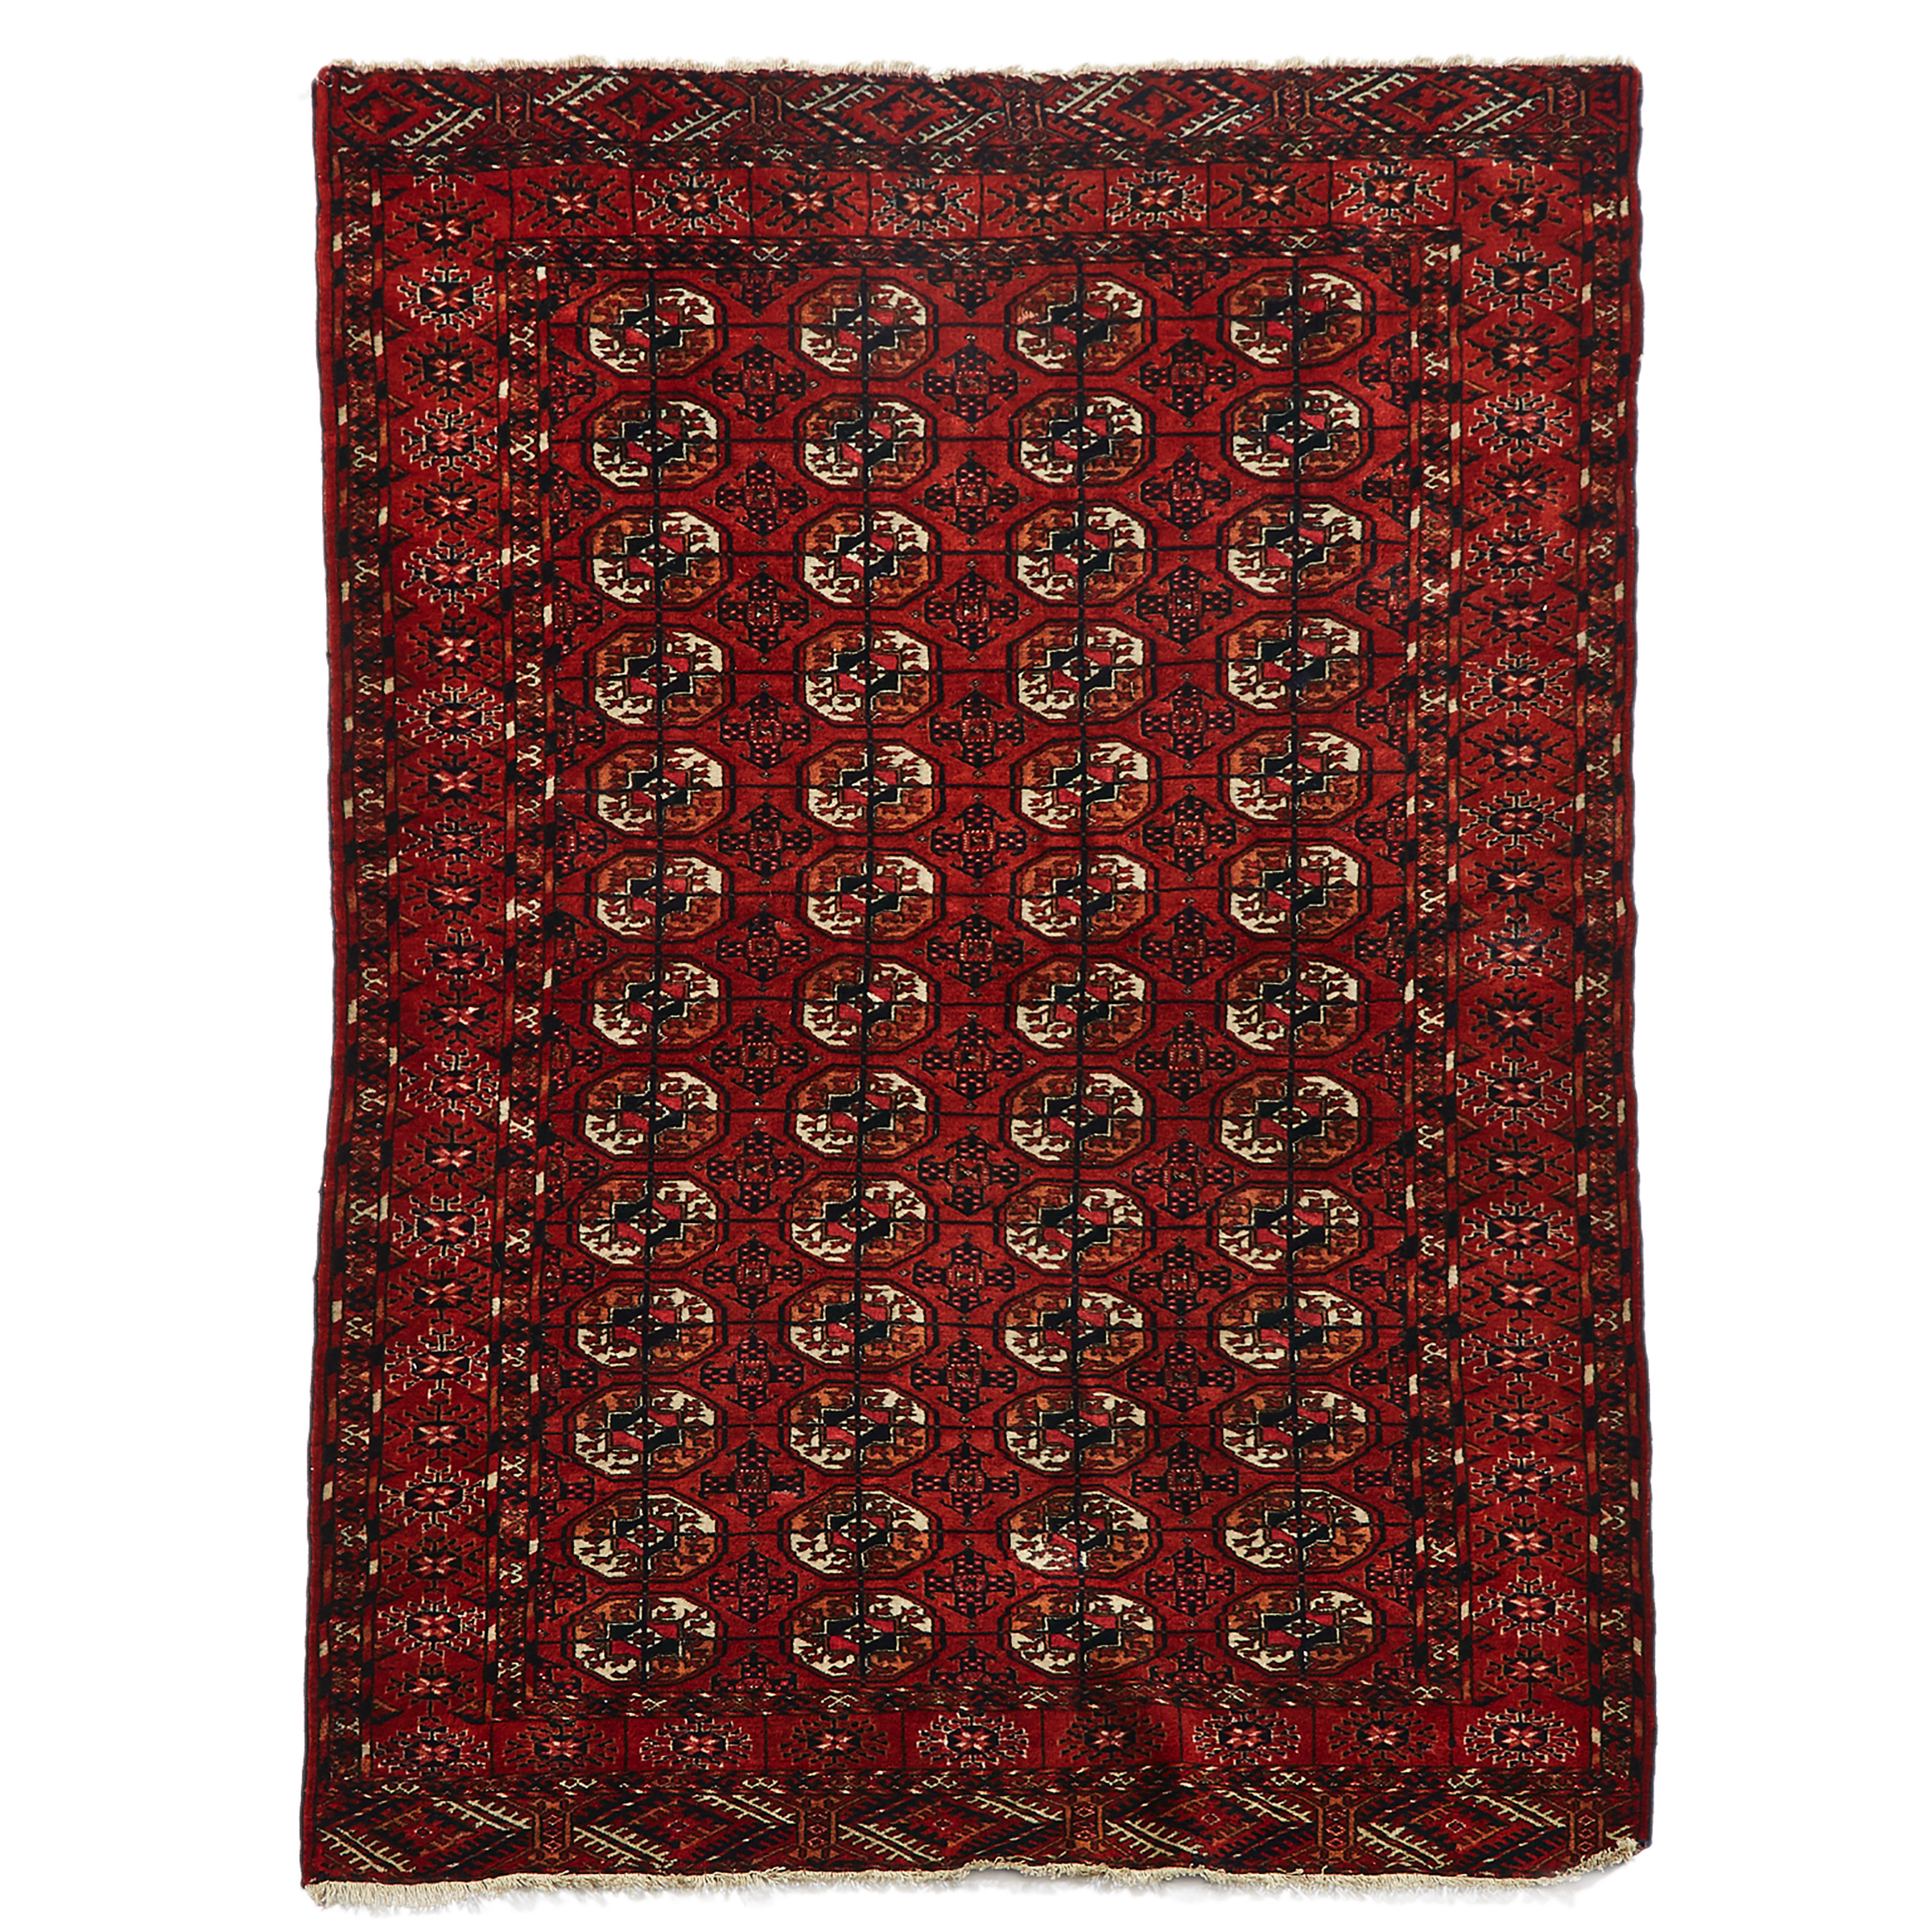 Tekke Rug, Central Asia, early to mid 20th century